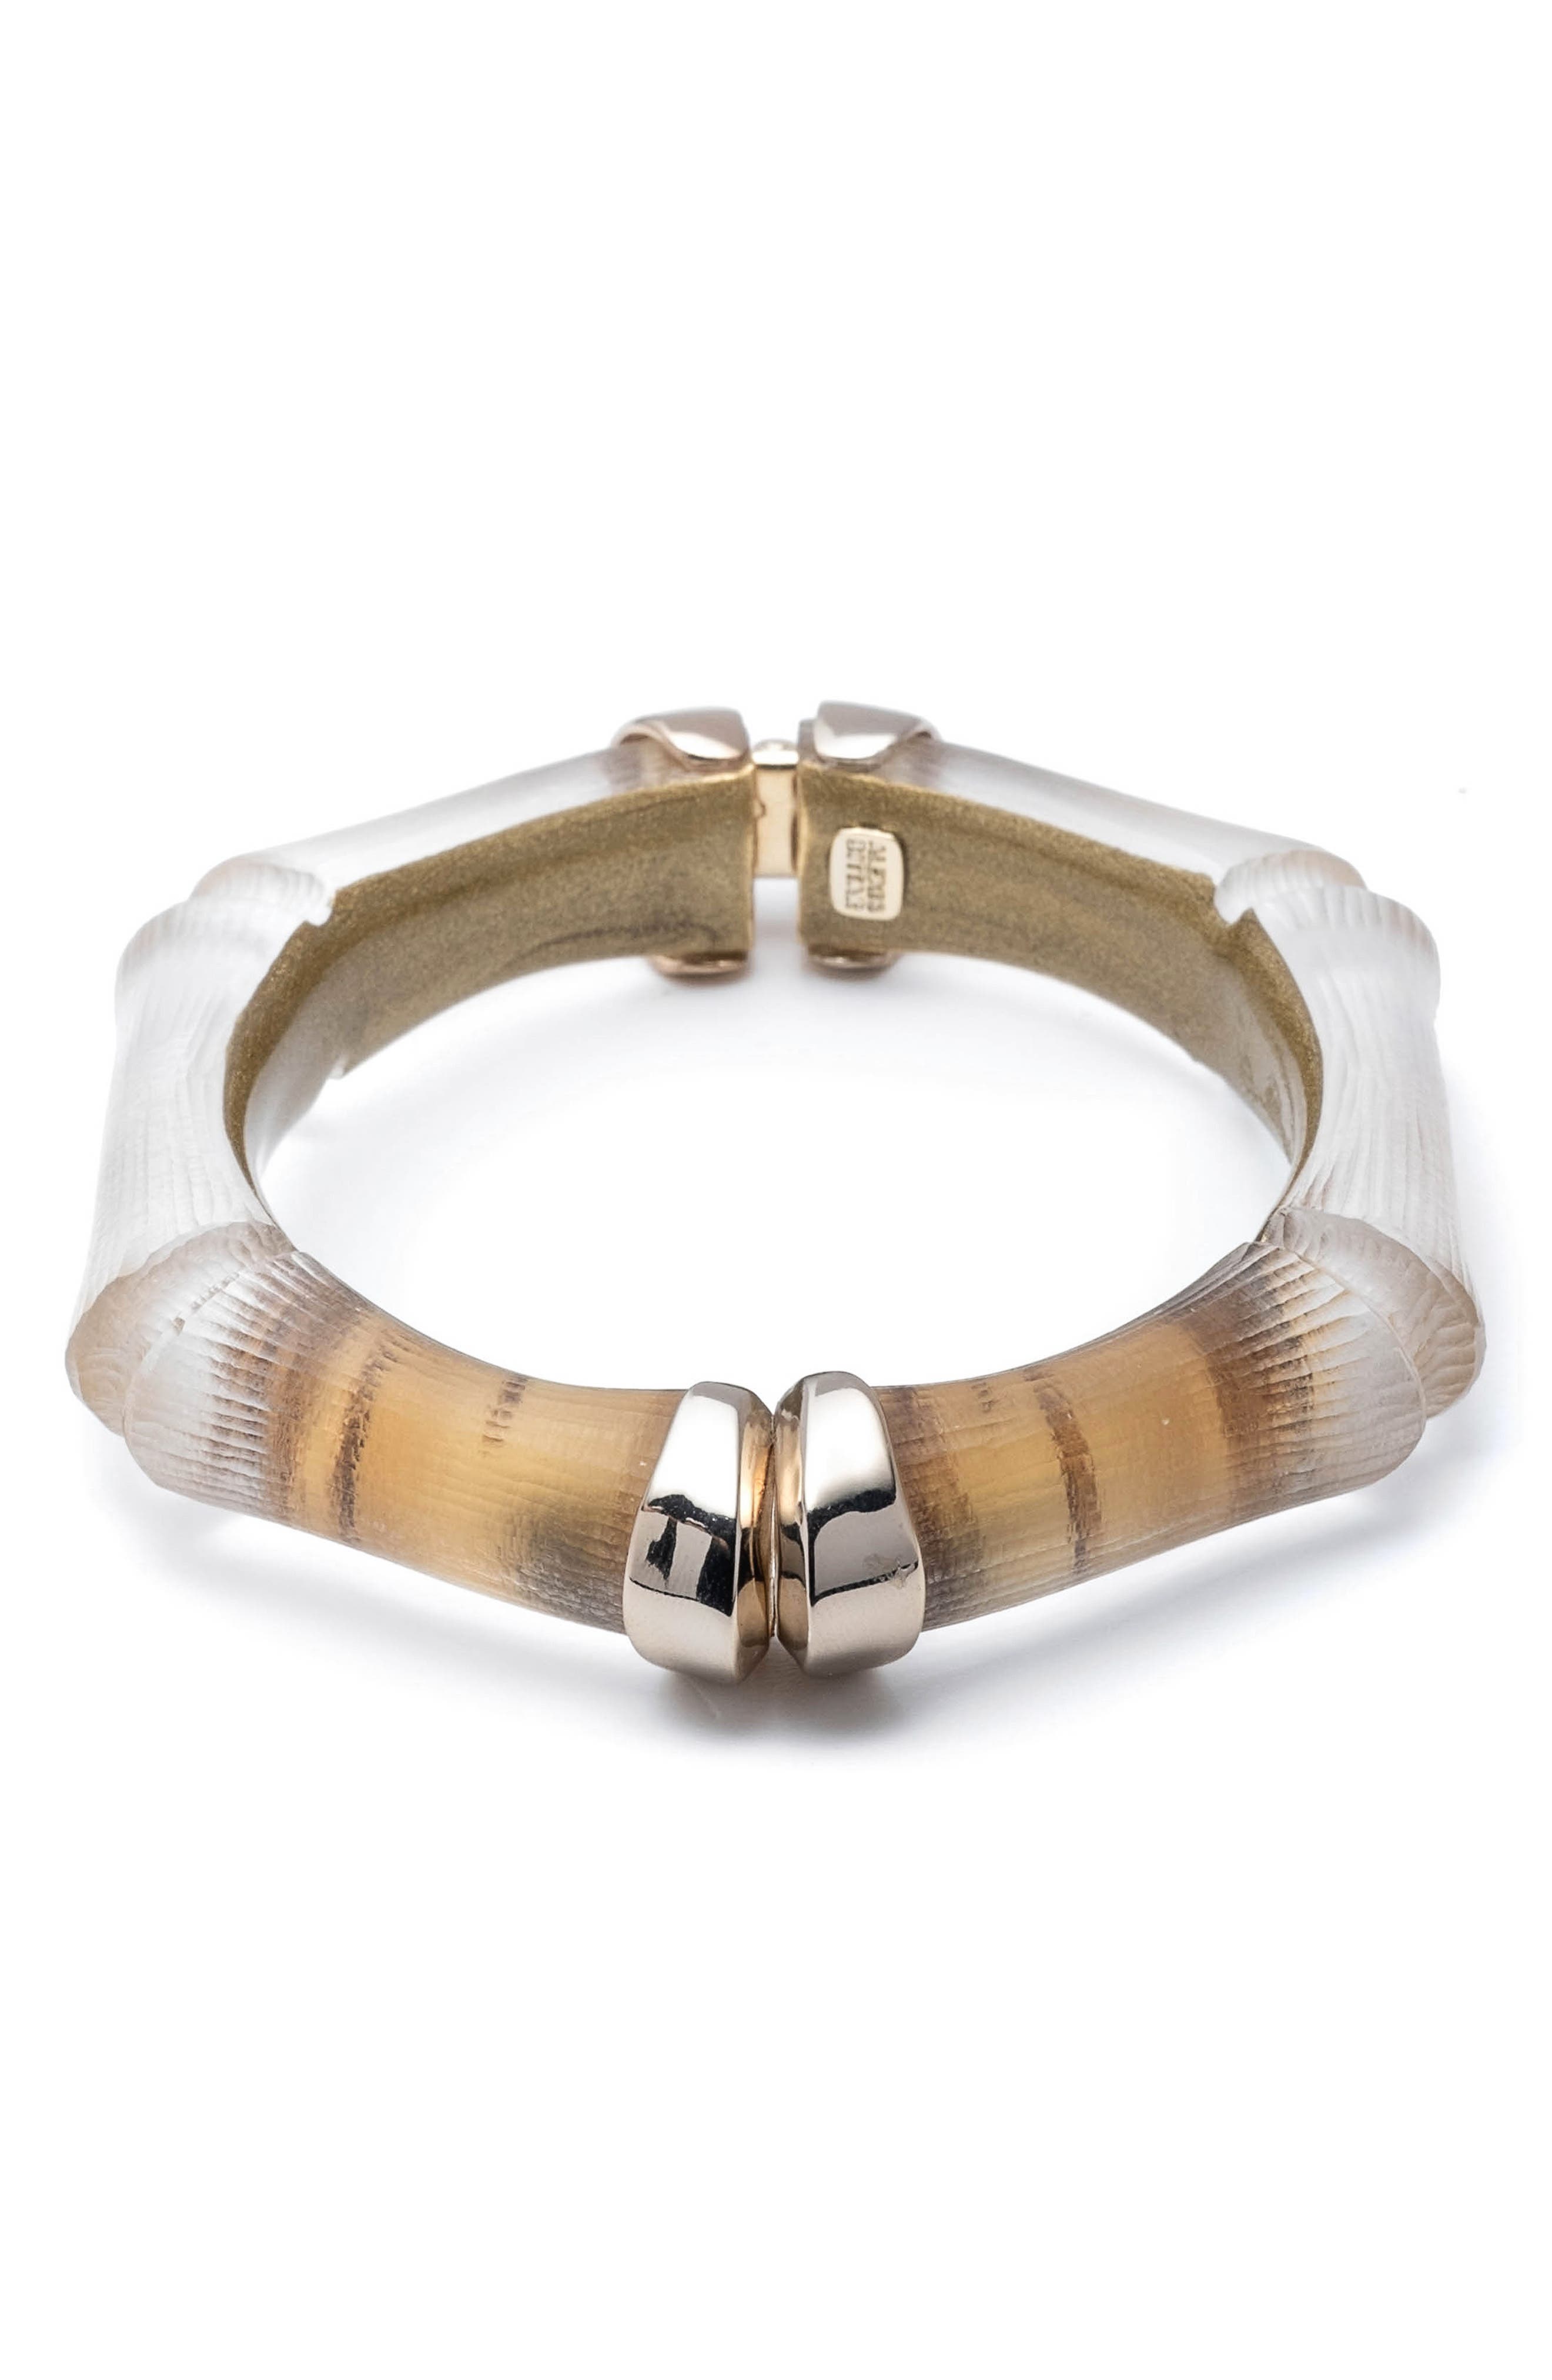 Alexis Bittar Bamboo Lucite Hinged Bangle Bracelet In Gold Bamboo